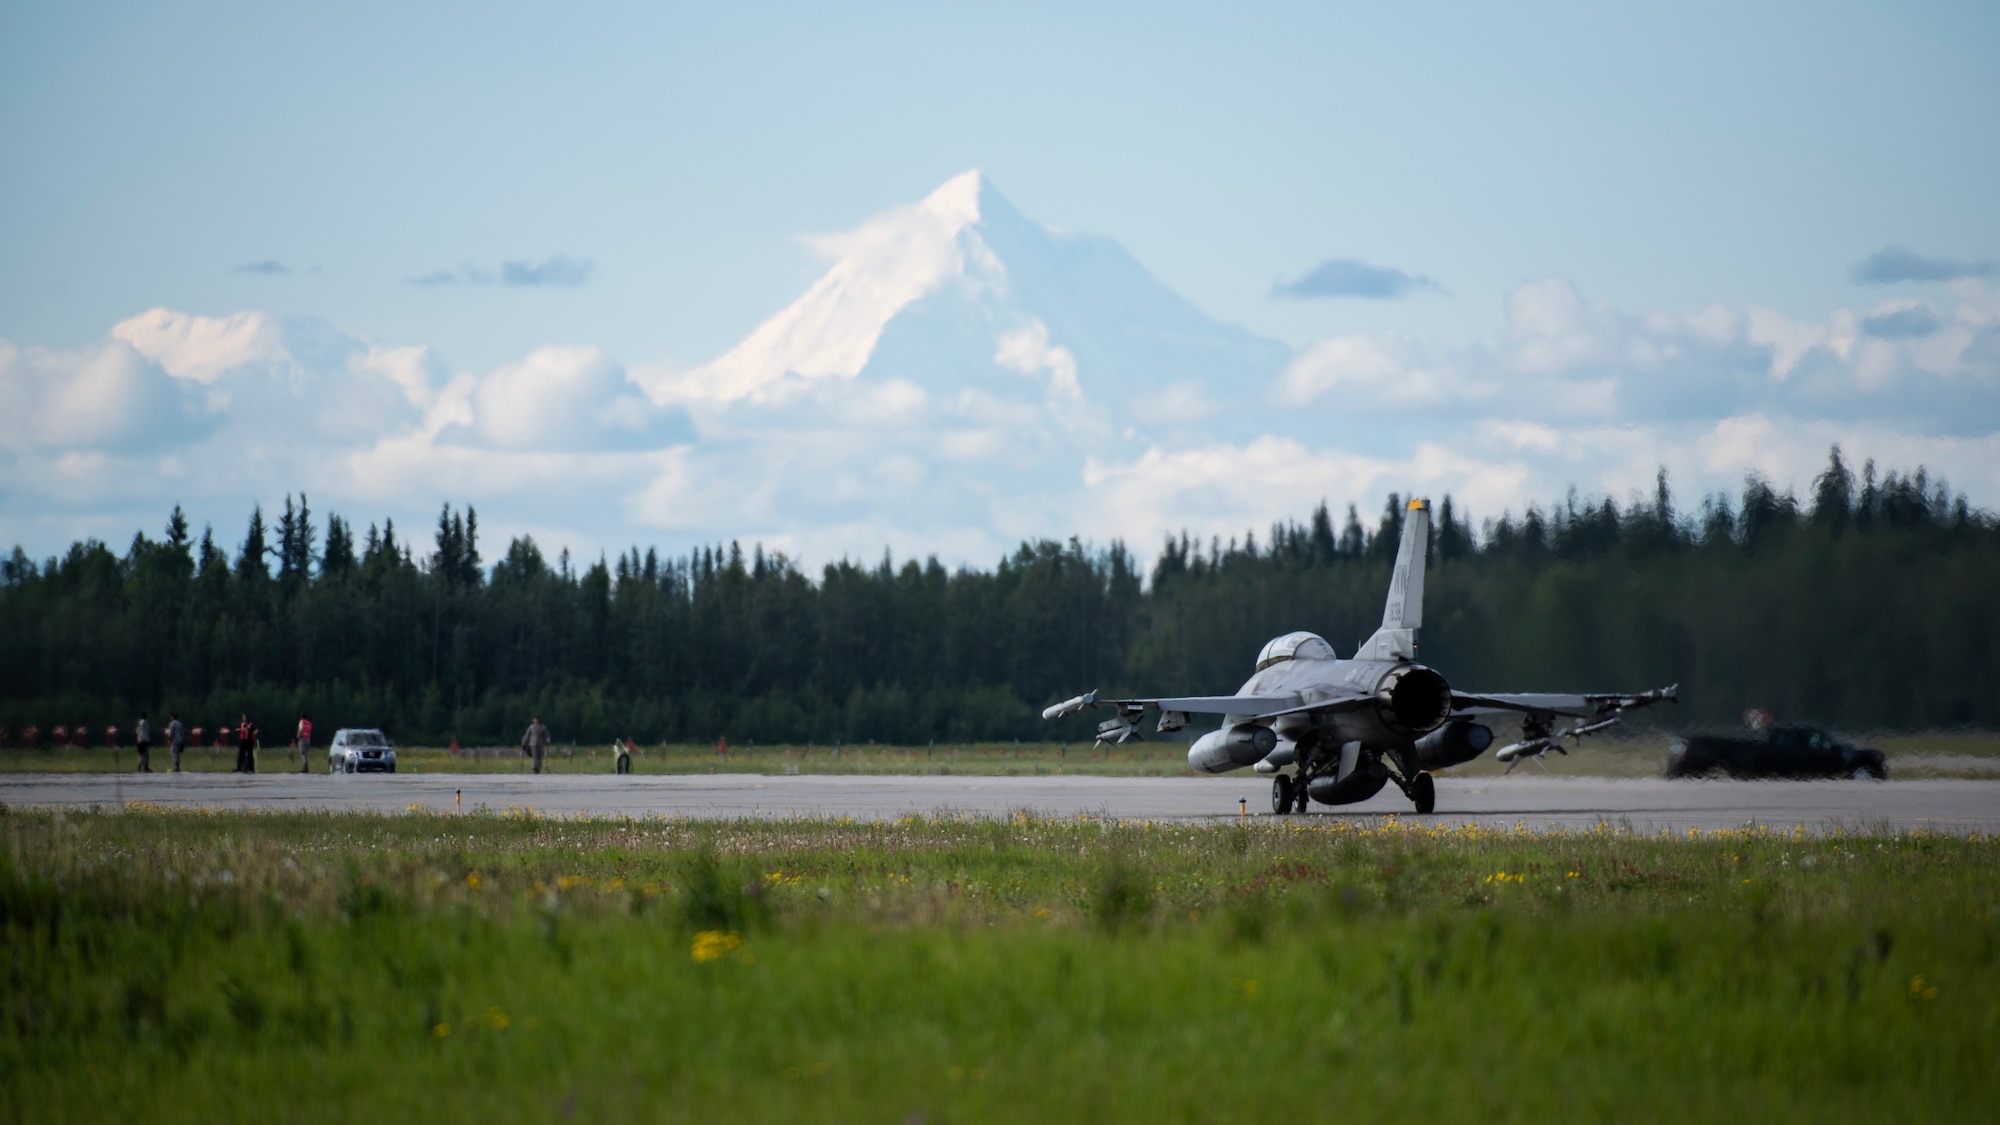 An F-16 Fighting Falcon from the 13th Fighter Squadron, Misawa Air Base, Japan, taxis at Eielson Air Force Base, Alaska, June 10, 2019. The 13th FS is participating in Exercise Red Flag-Alaska 19-2, a large-scale training exercise, with units and allied nation’s air forces from around the Pacific. (U.S. Air Force photo by Senior Airman Stefan Alvarez)